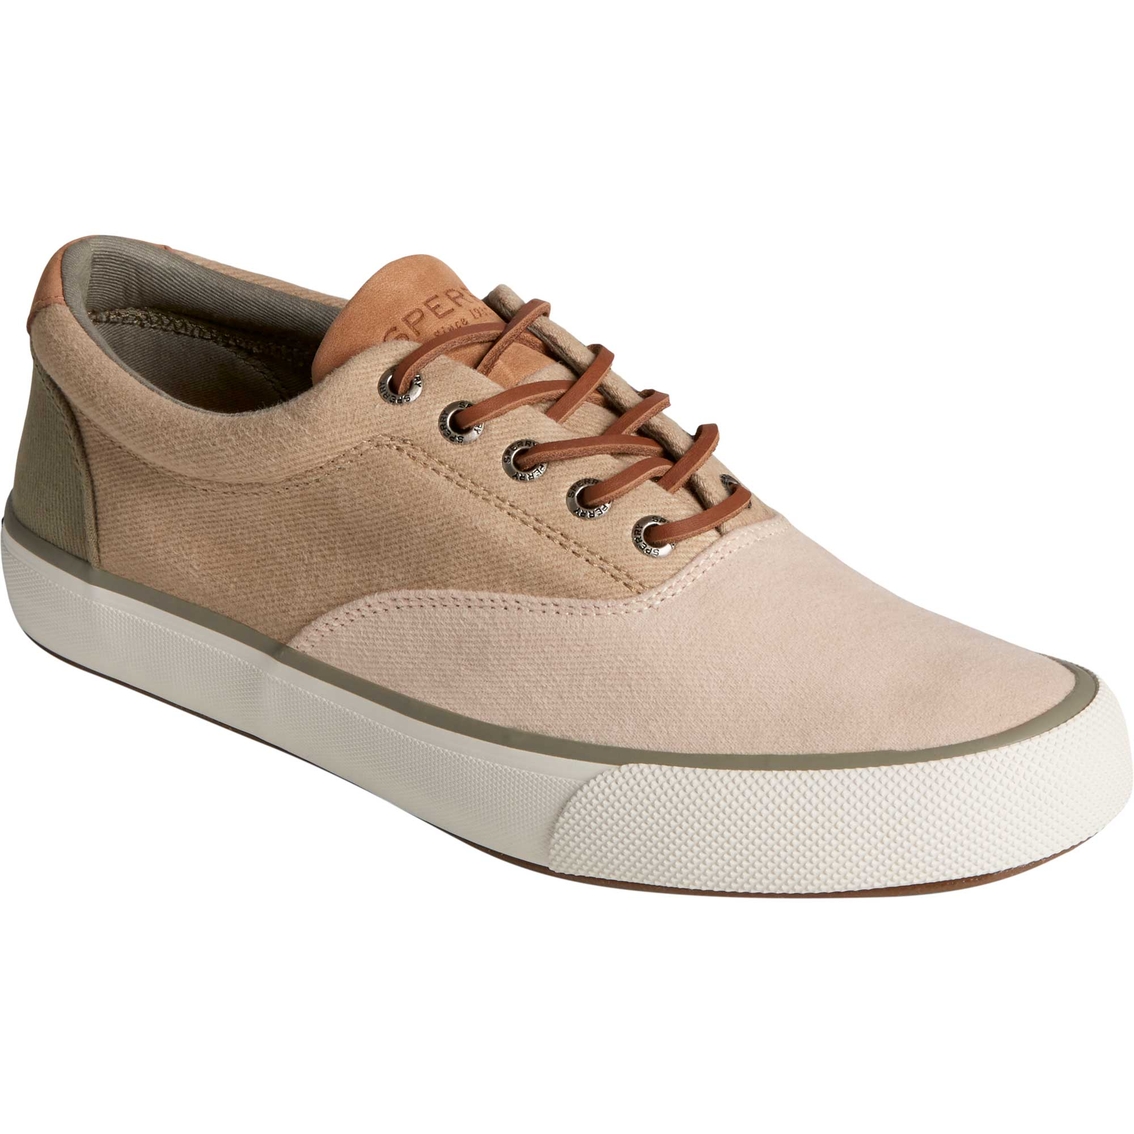 Sperry Men's Seacycled Striper Ii Cvo Twill Sneakers | Casuals | Shoes ...